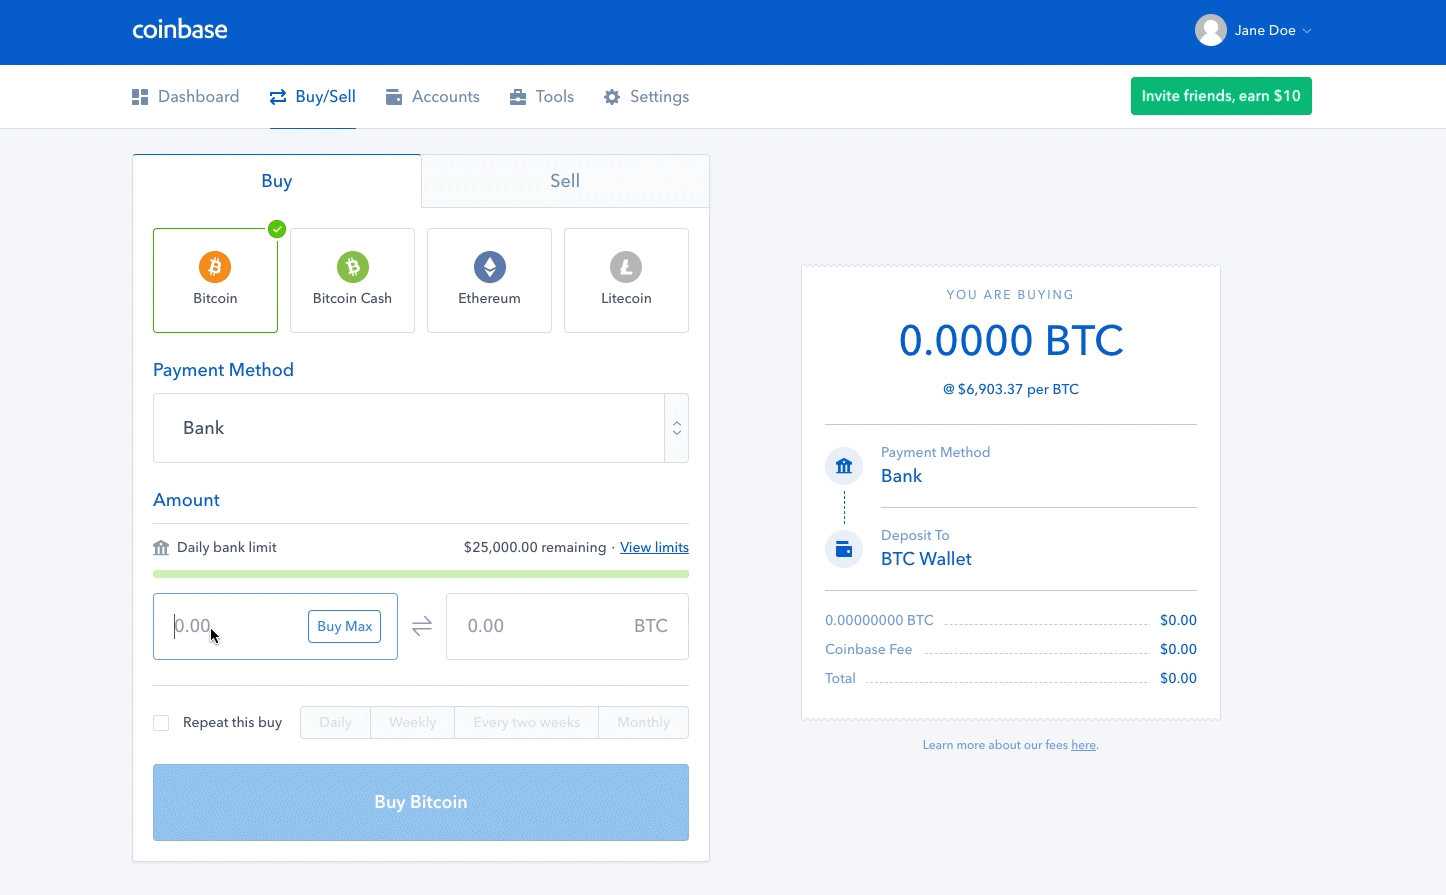 How to Buy, Sell & Transfer Crypto on Coinbase [BTC, ETH, More]